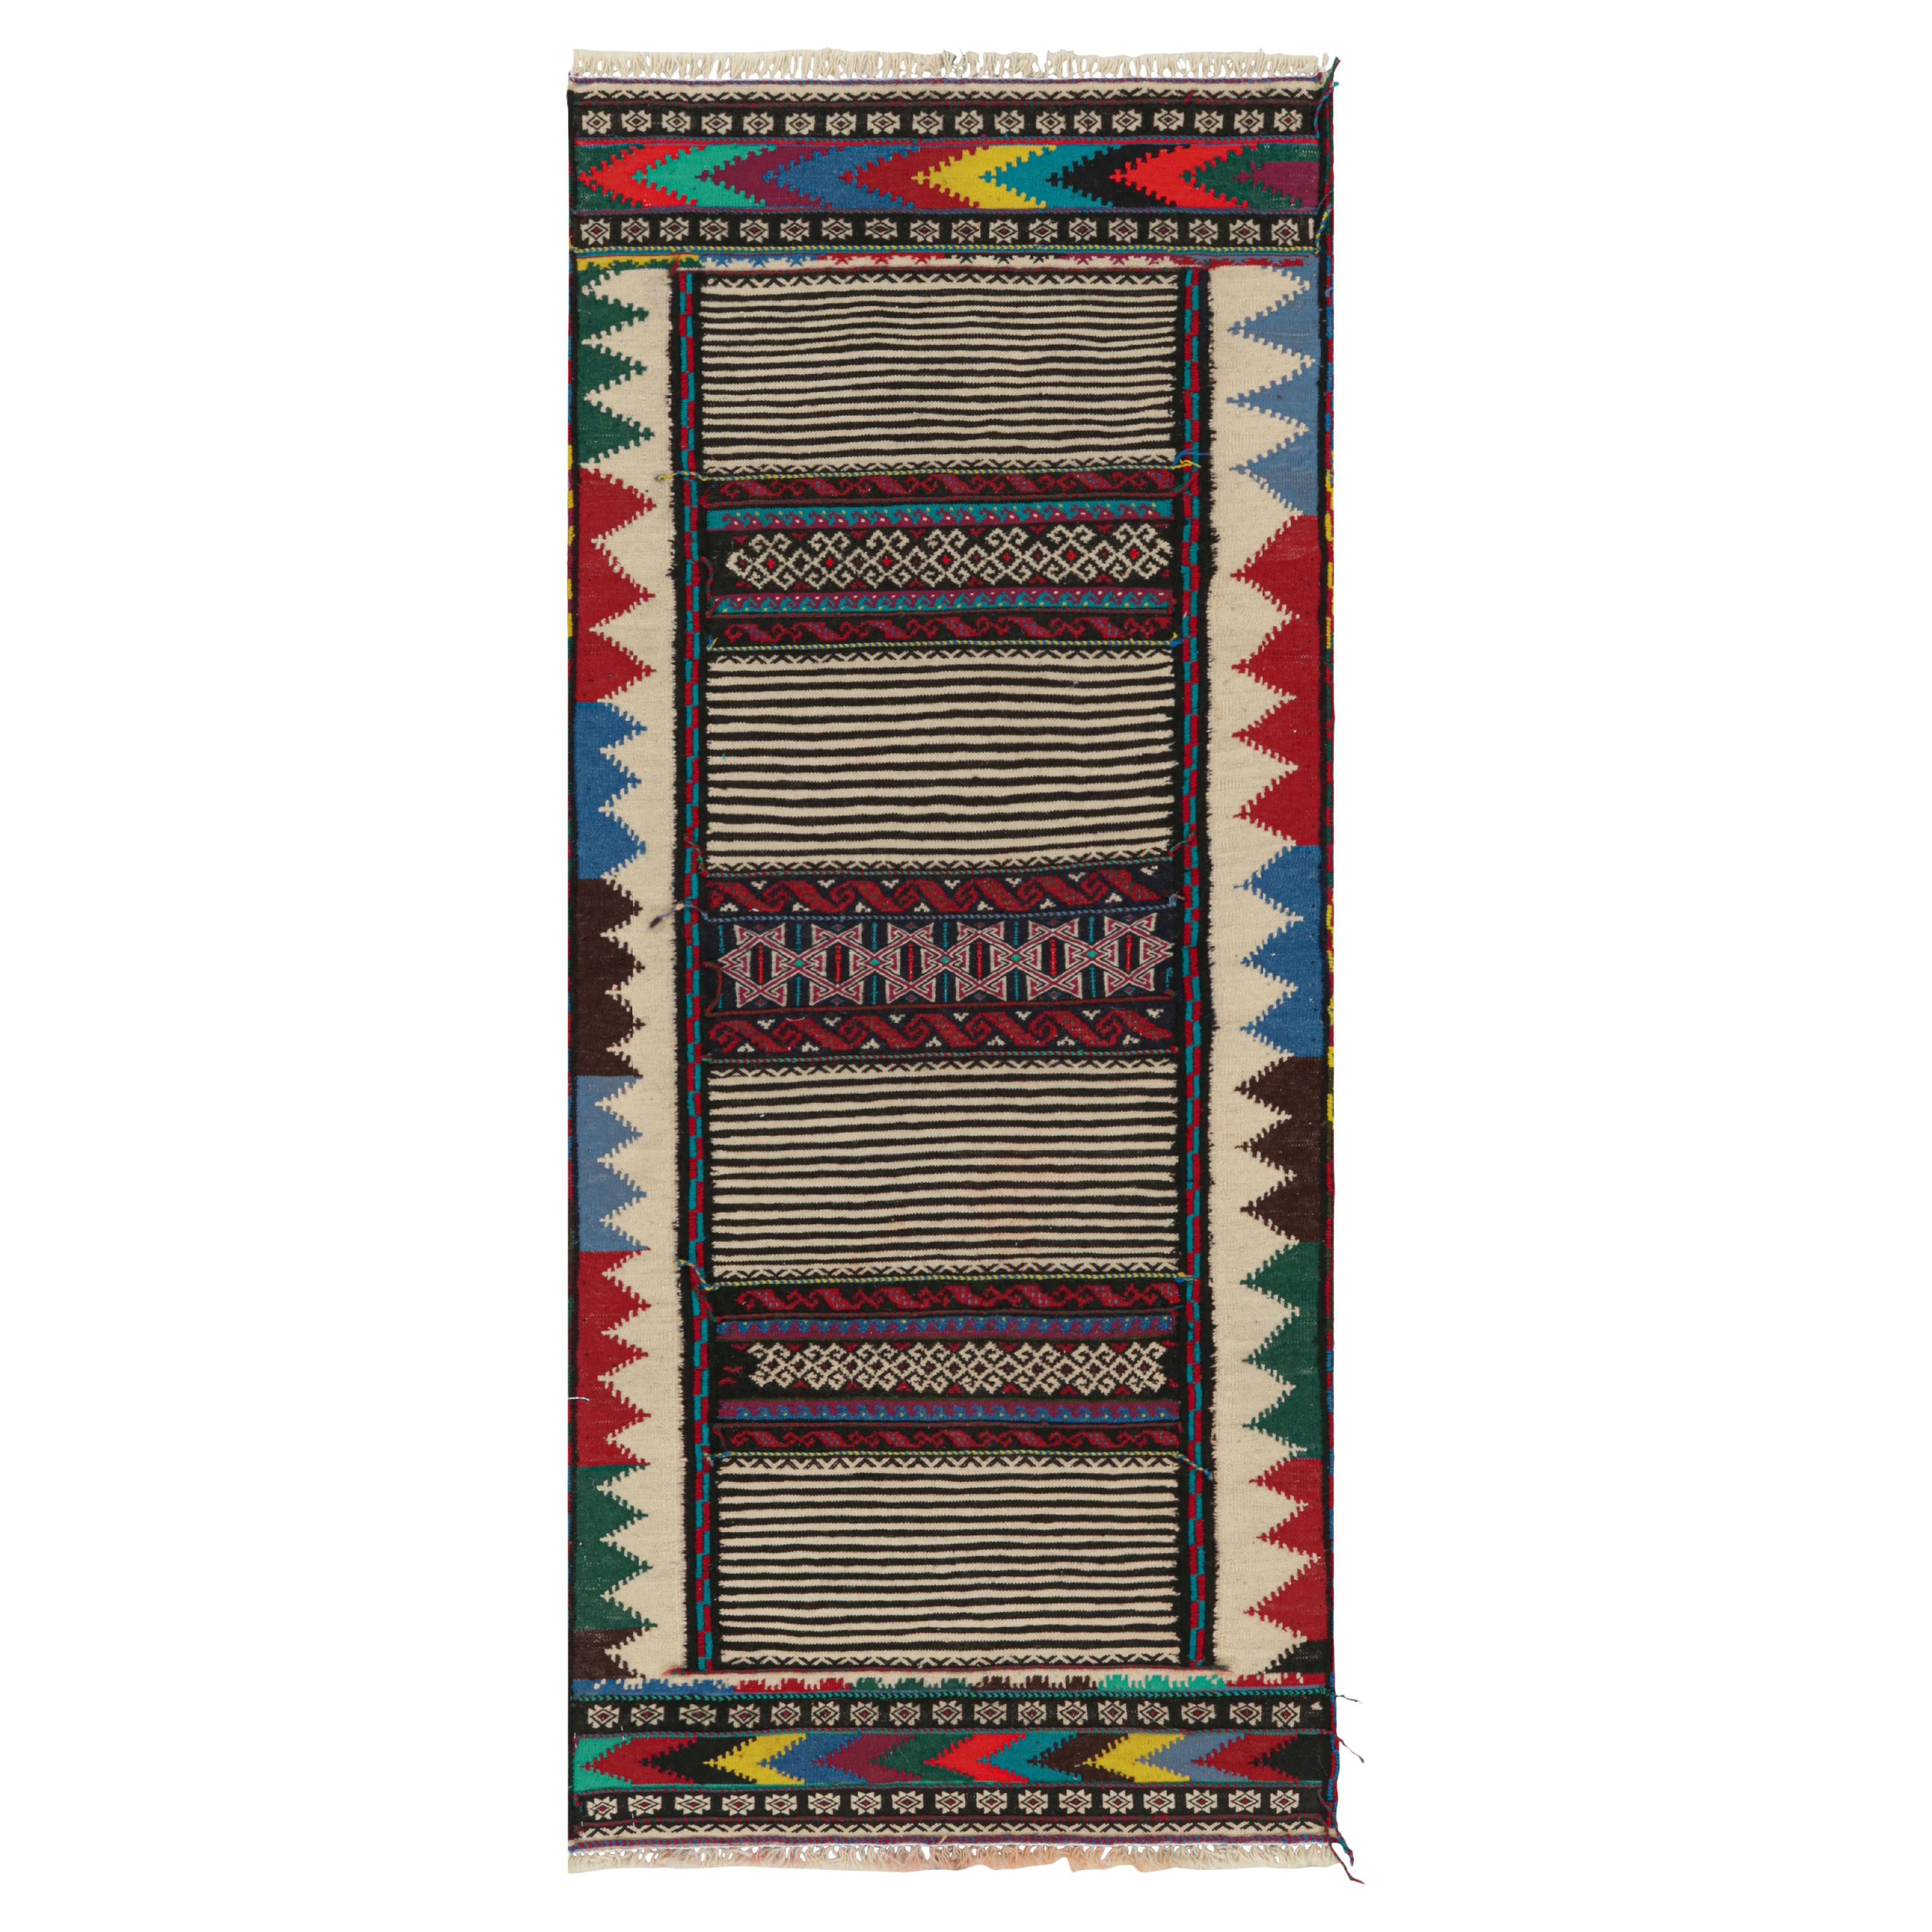 Vintage Afghan Kilim Rug with Stripes and Geometric Patterns, from Rug & Kilim For Sale